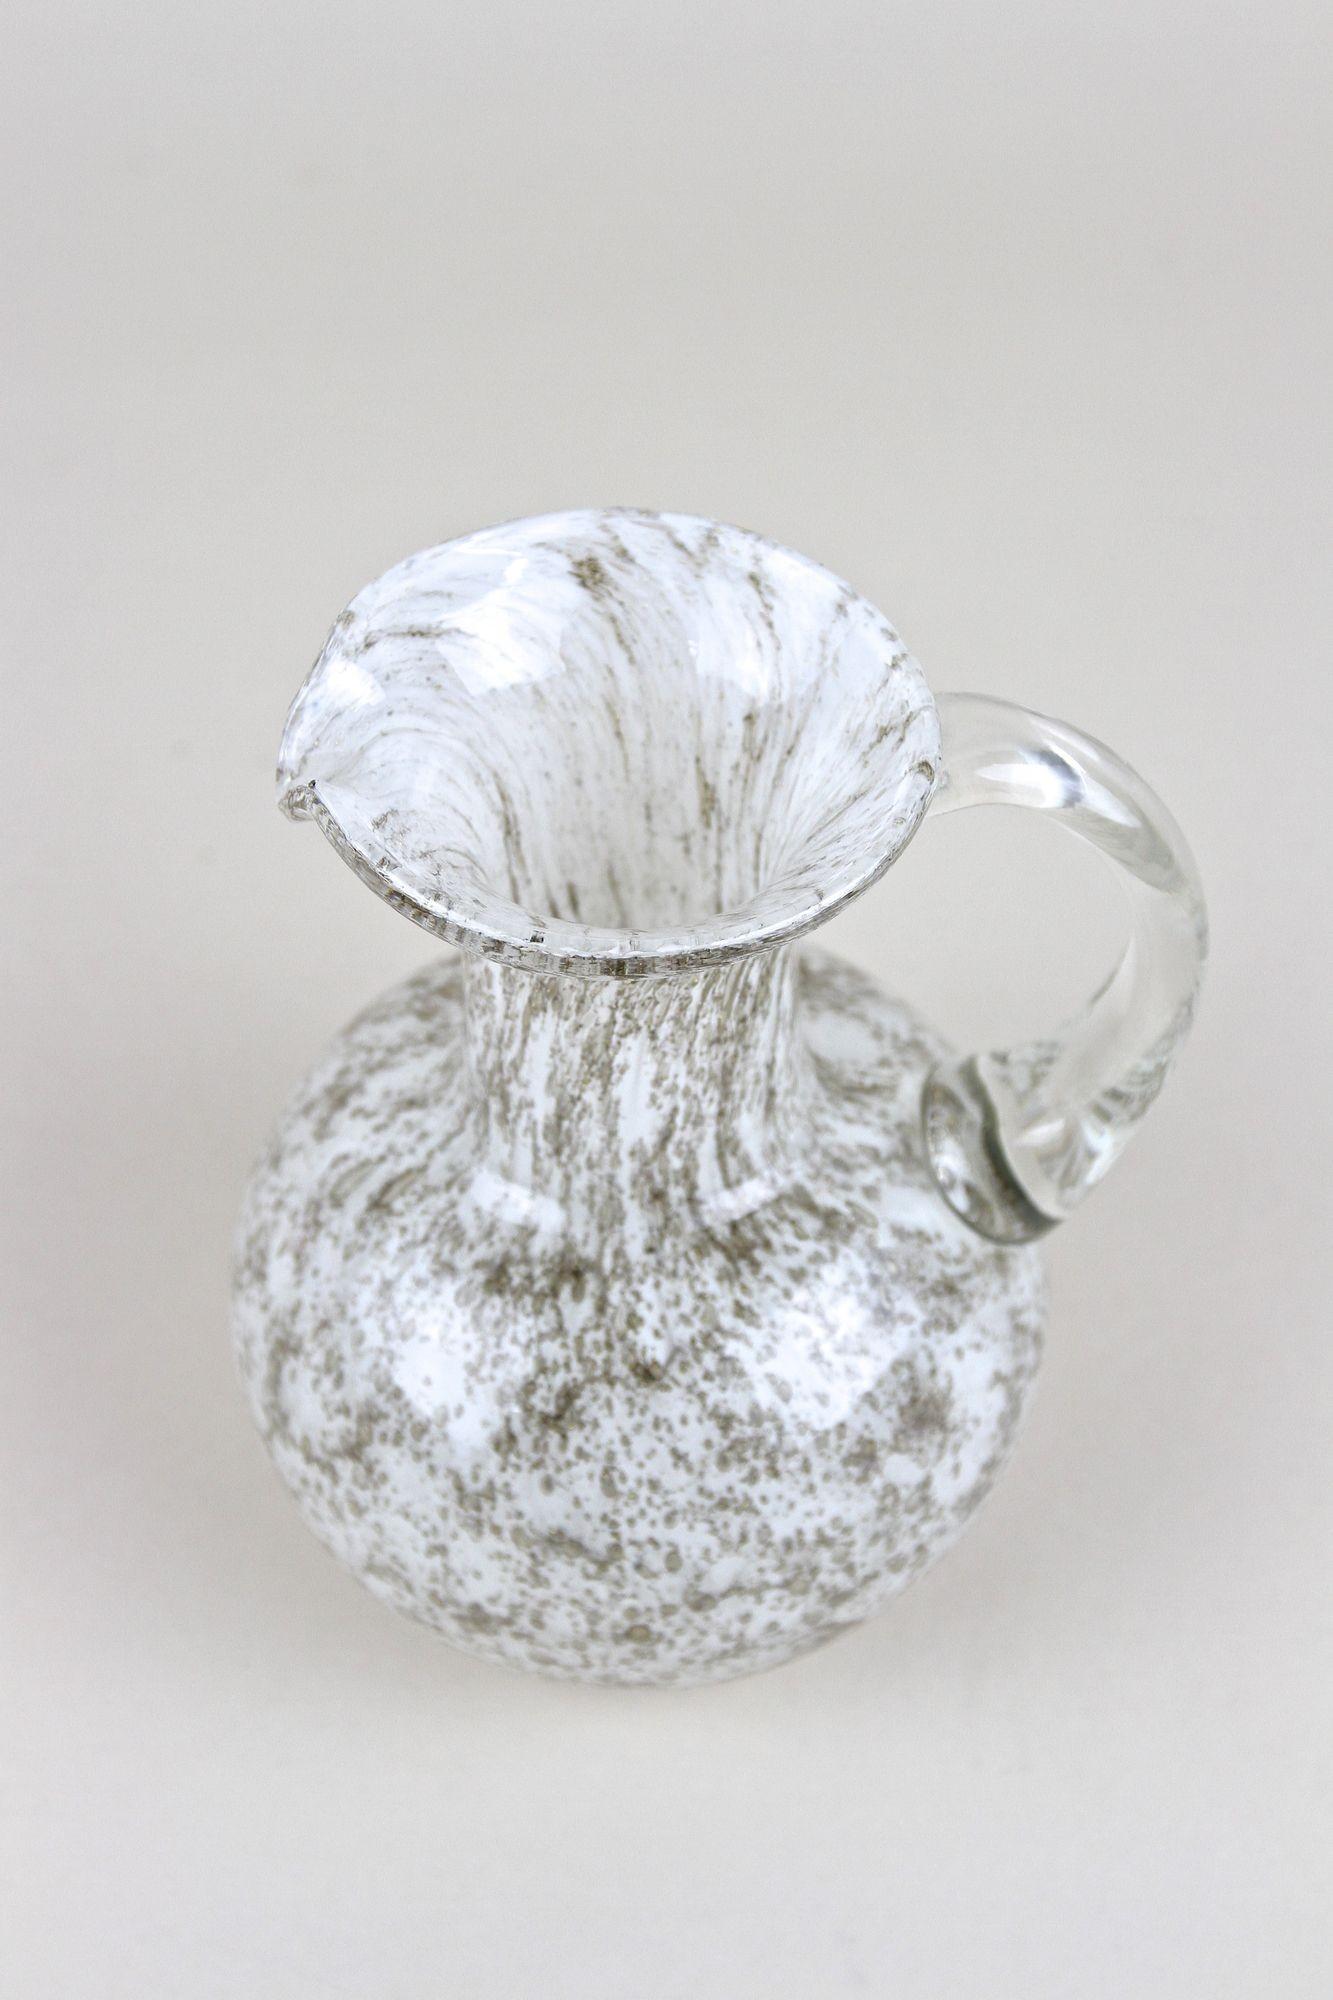 Unique designed Murano glass jug/ glass vase out of the famous workshops in Italy from the mid 20th century around 1960. This wonderful shaped jug was handcrafted in a special technique showing hundreds of little air bubbles captured in the glass